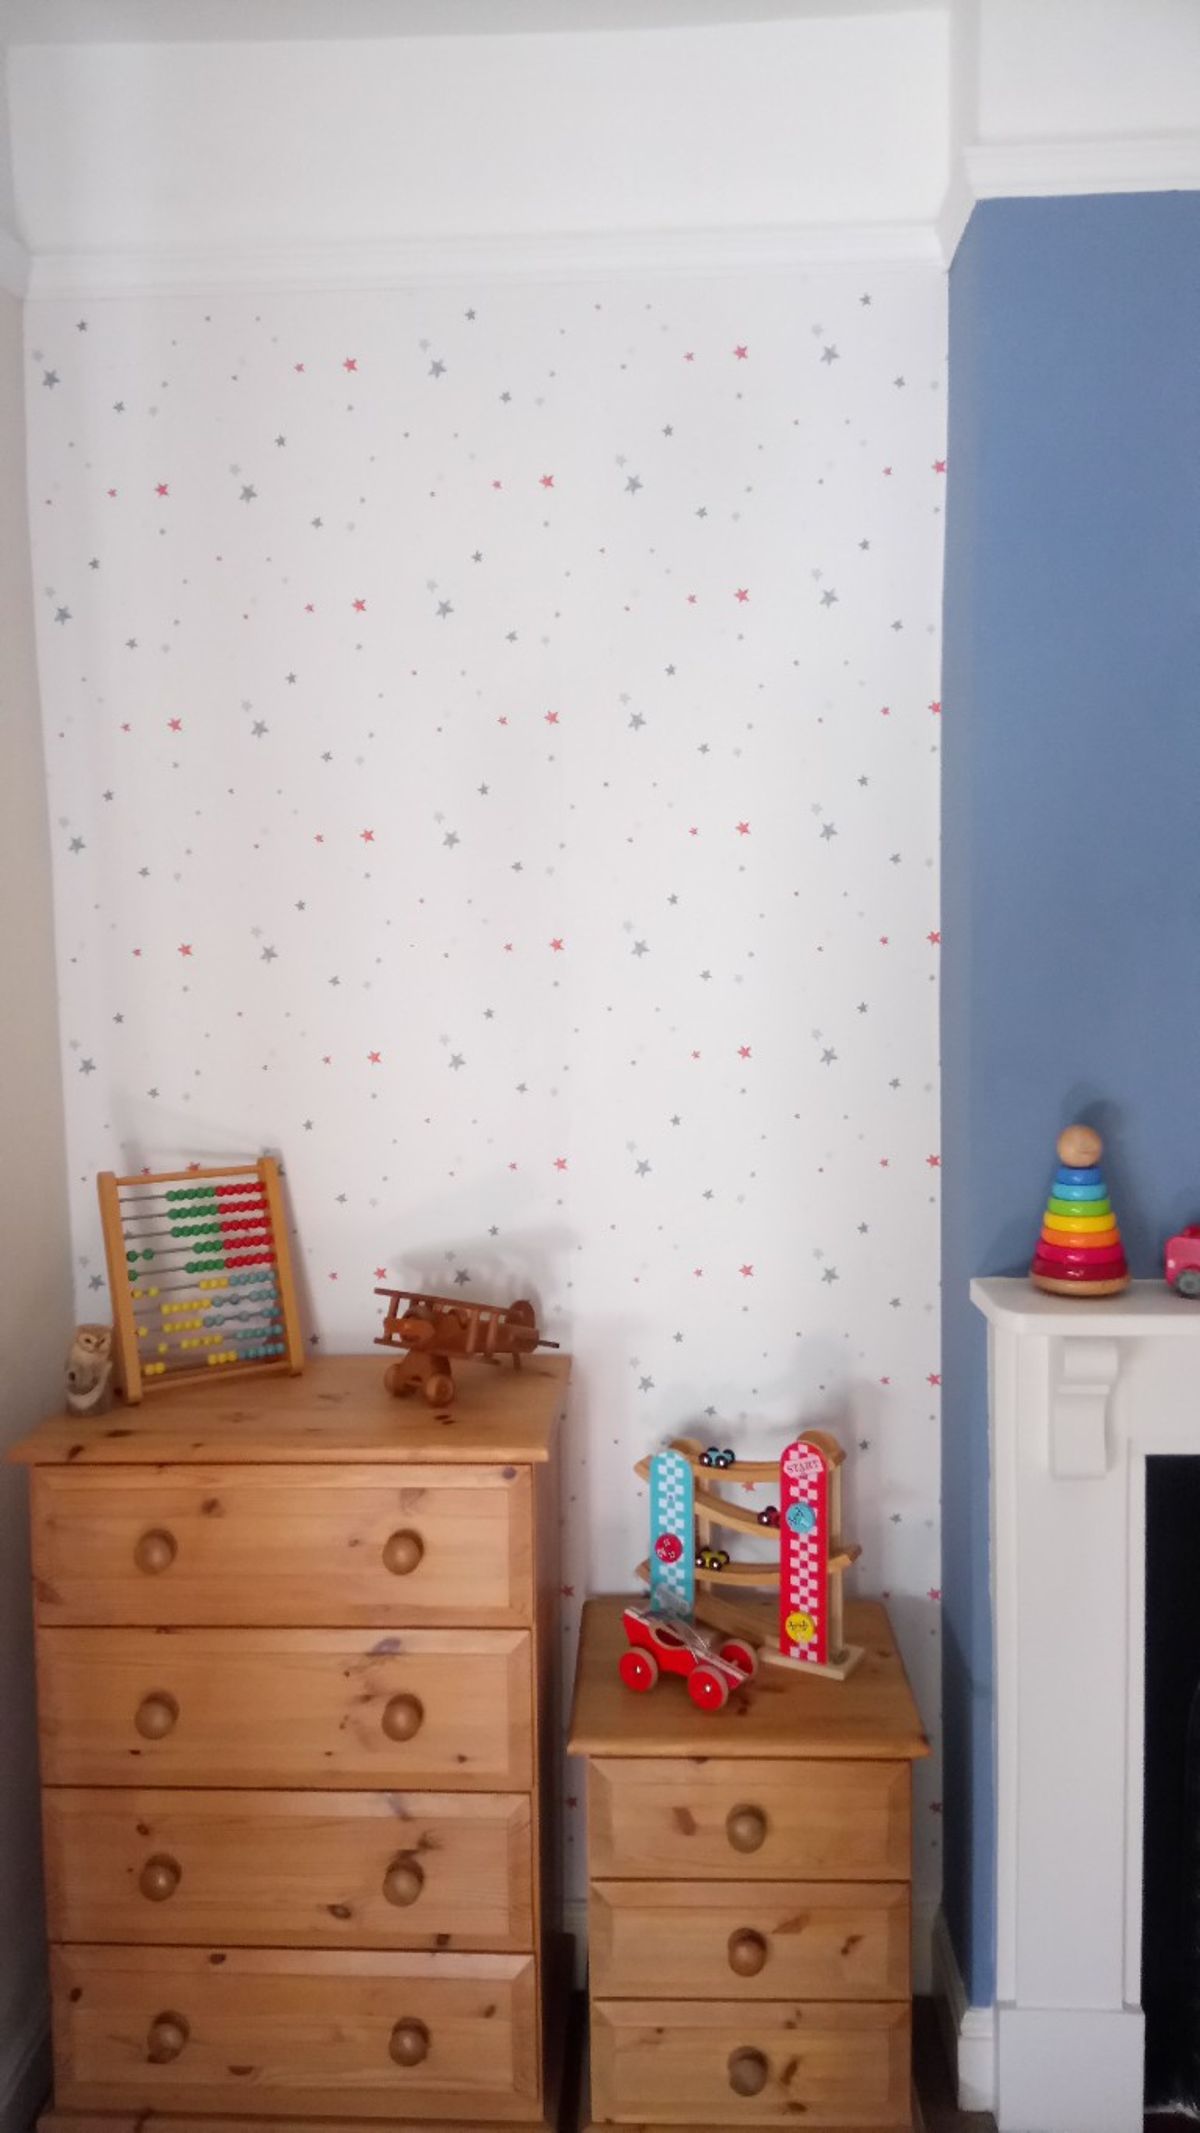 Free To Collect, Two Partial Rolls Of Laura Ashley - Wall - HD Wallpaper 